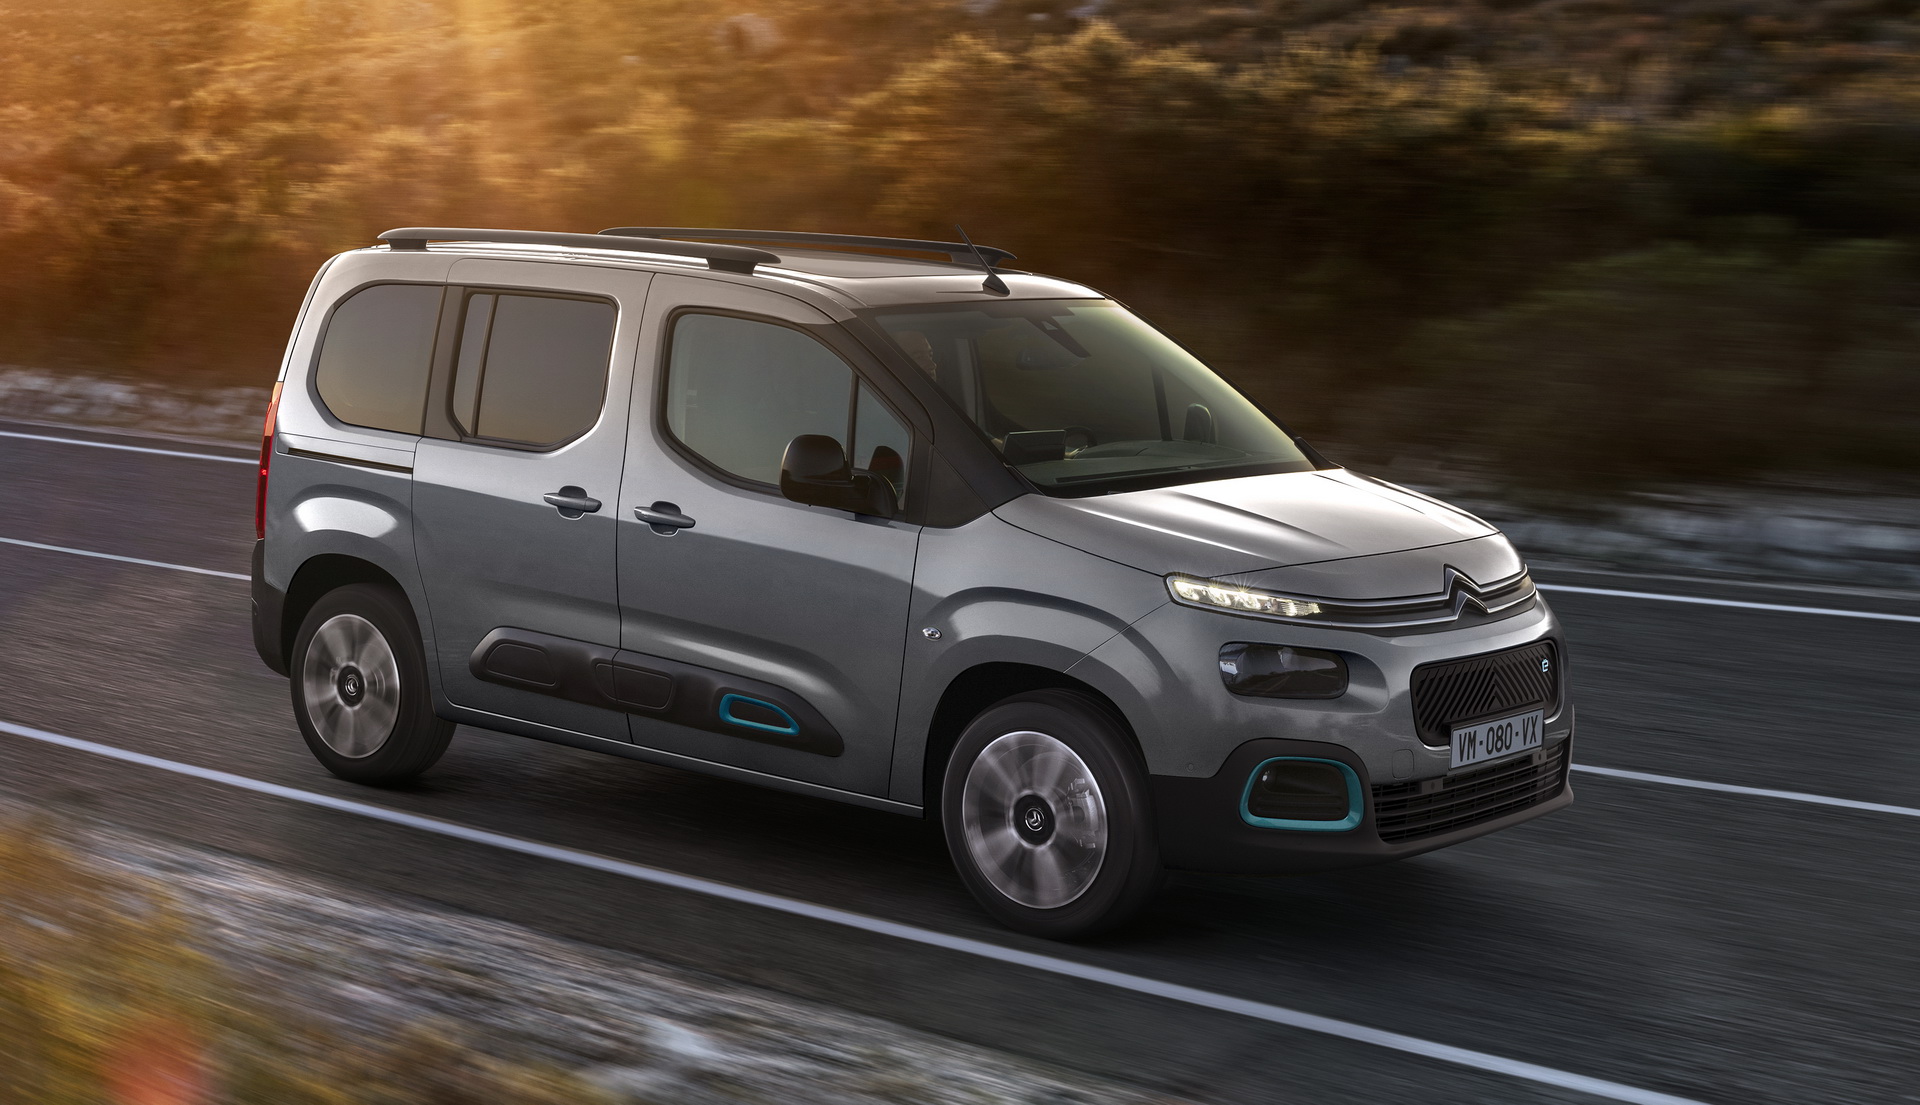 2021 Citroen E-Berlingo Electric Mpv Launches With Up To 7 Seats, 174-Mile Range | Carscoops